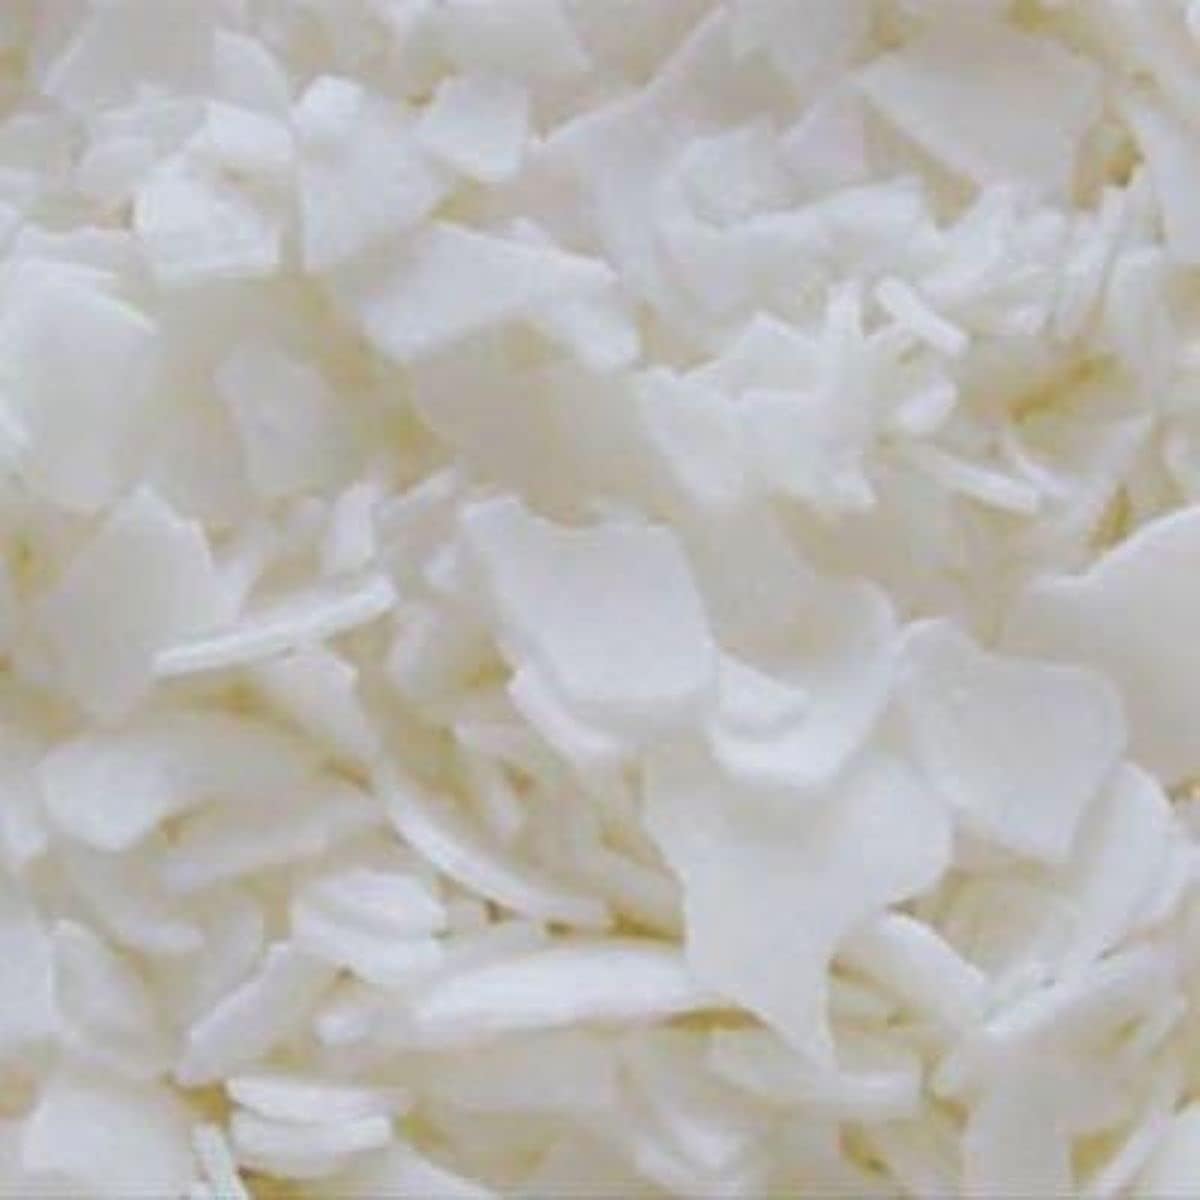 Pure Soy Wax 416 for Candle and Tart Making - 10 LB